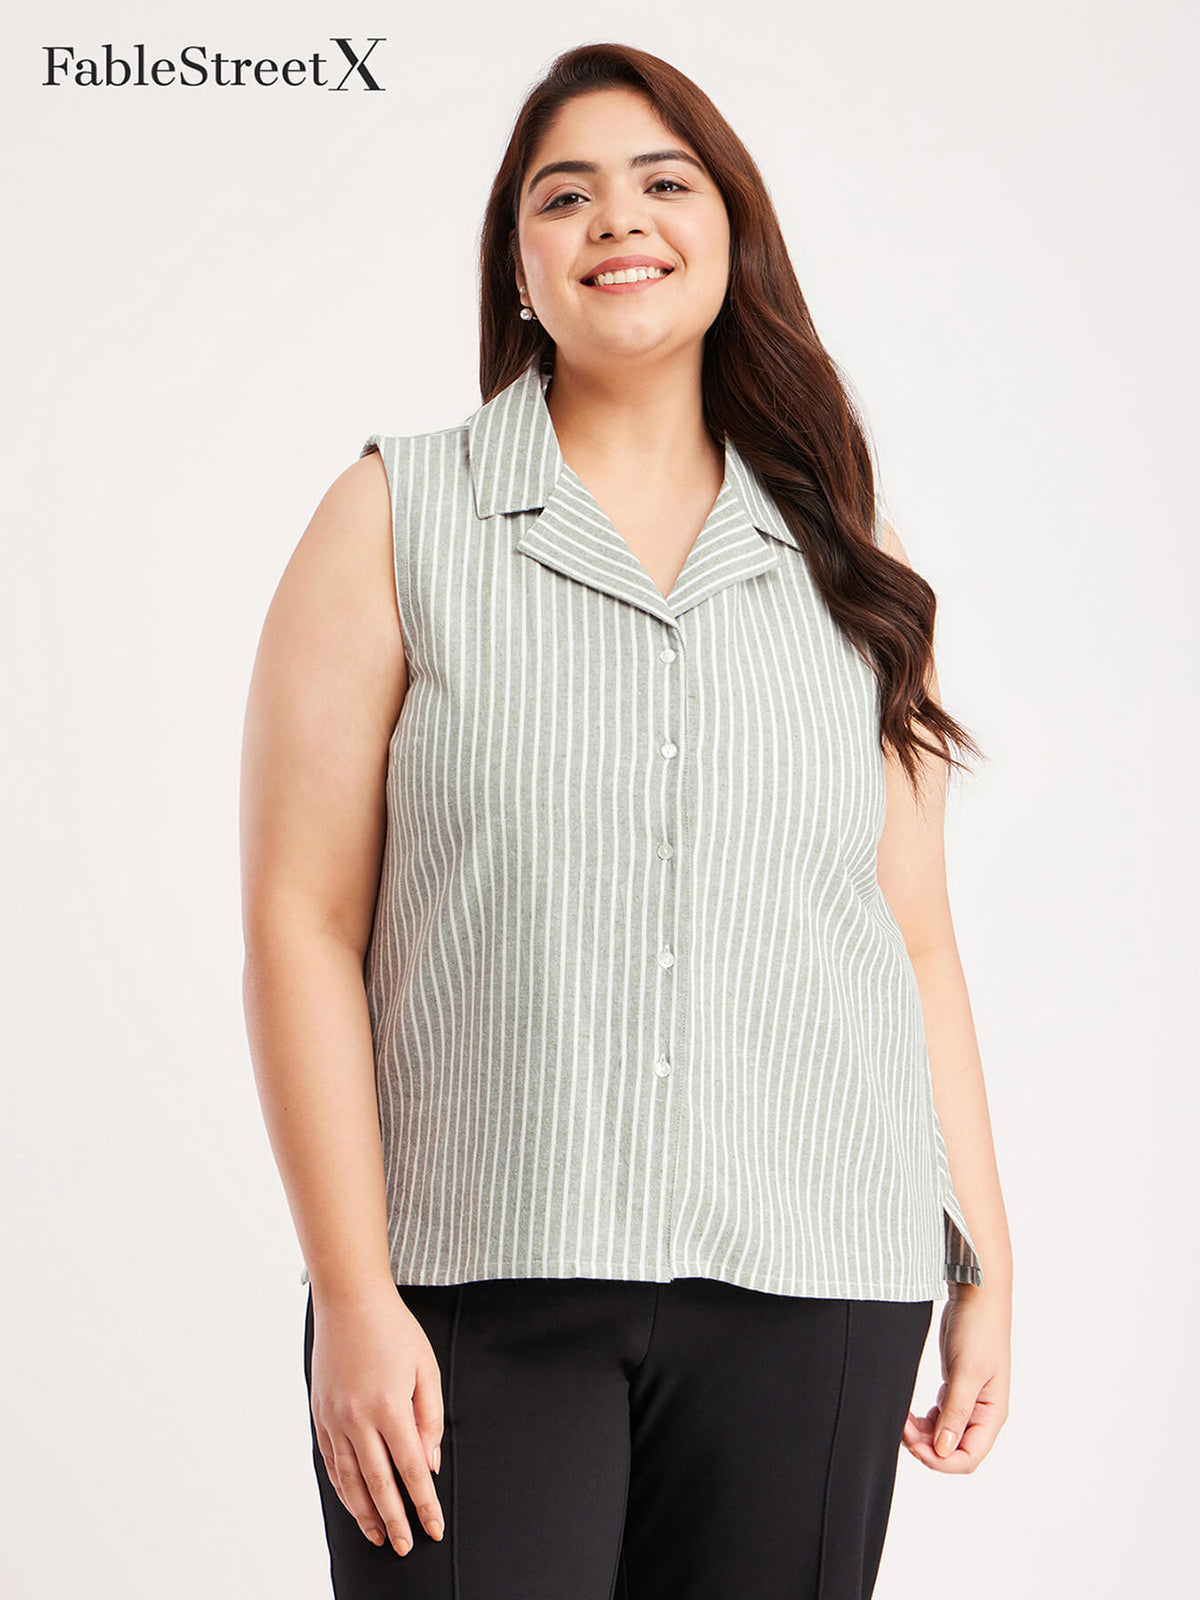 Cotton Linen Stripes Top - Olive And Off-White